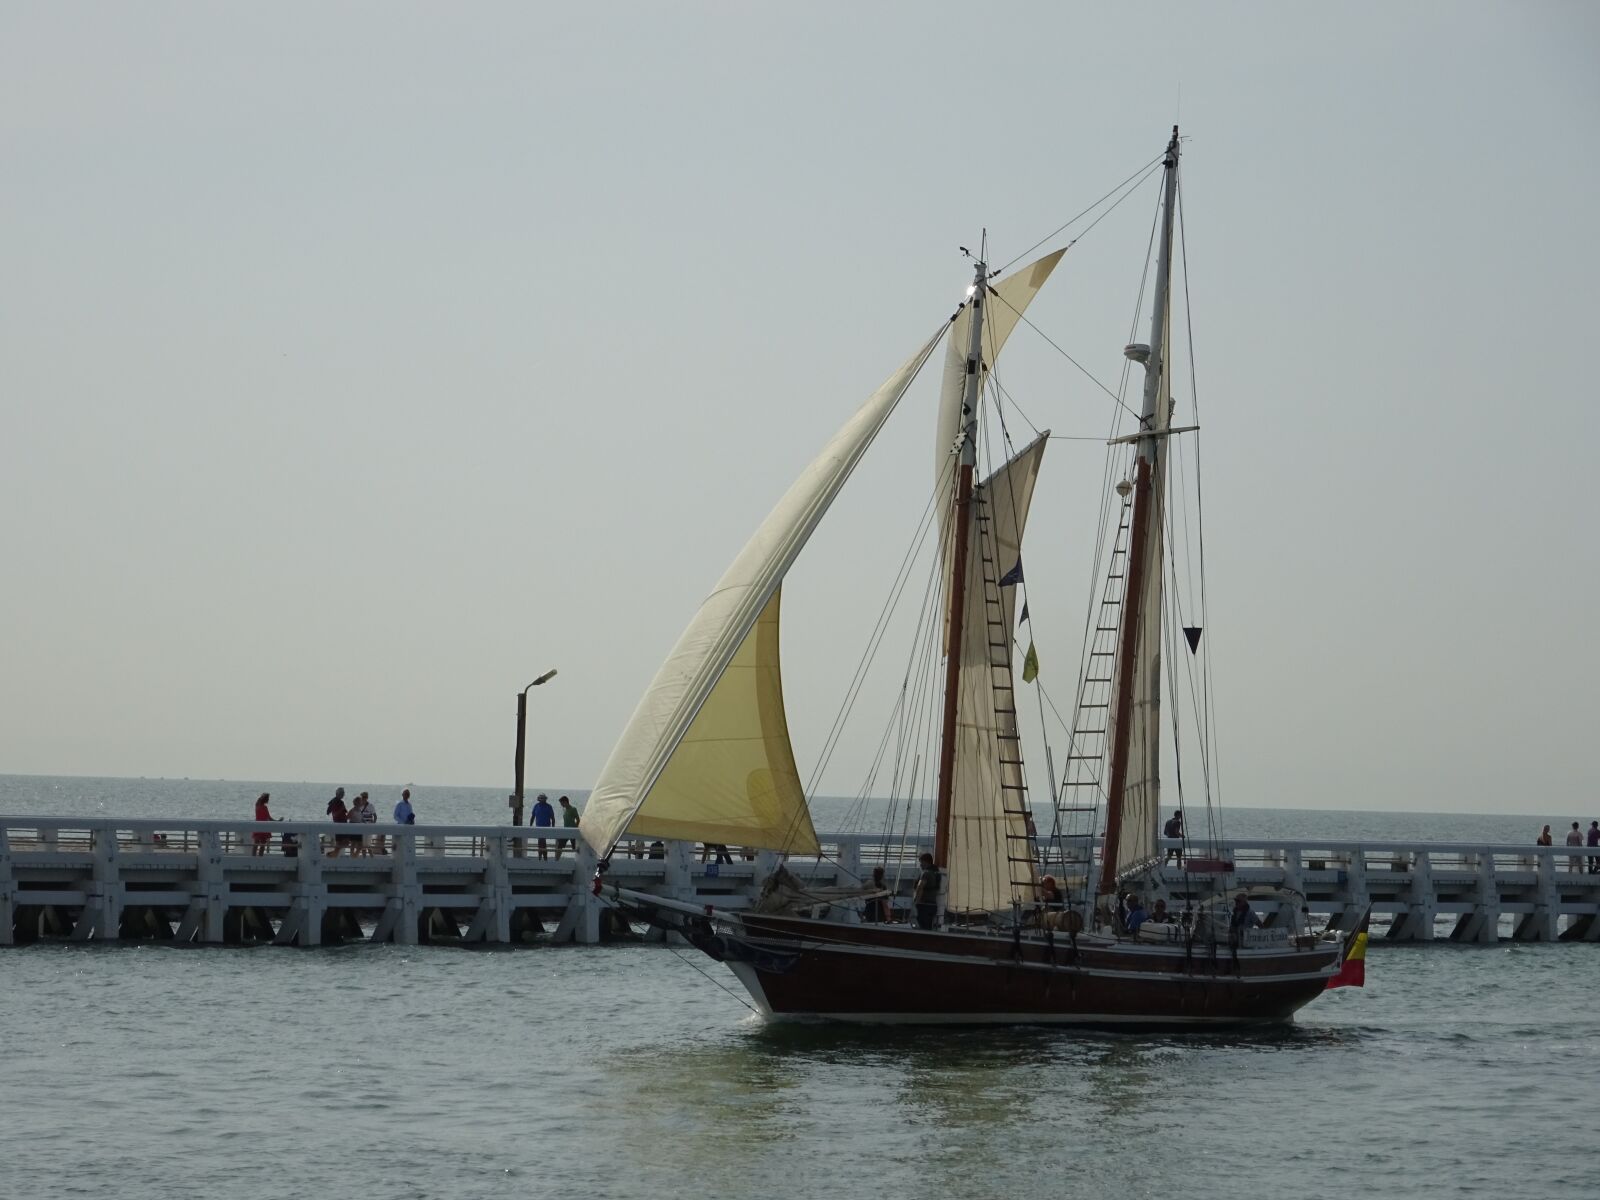 Sony Cyber-shot DSC-WX350 sample photo. Ship, sailing vessel, water photography